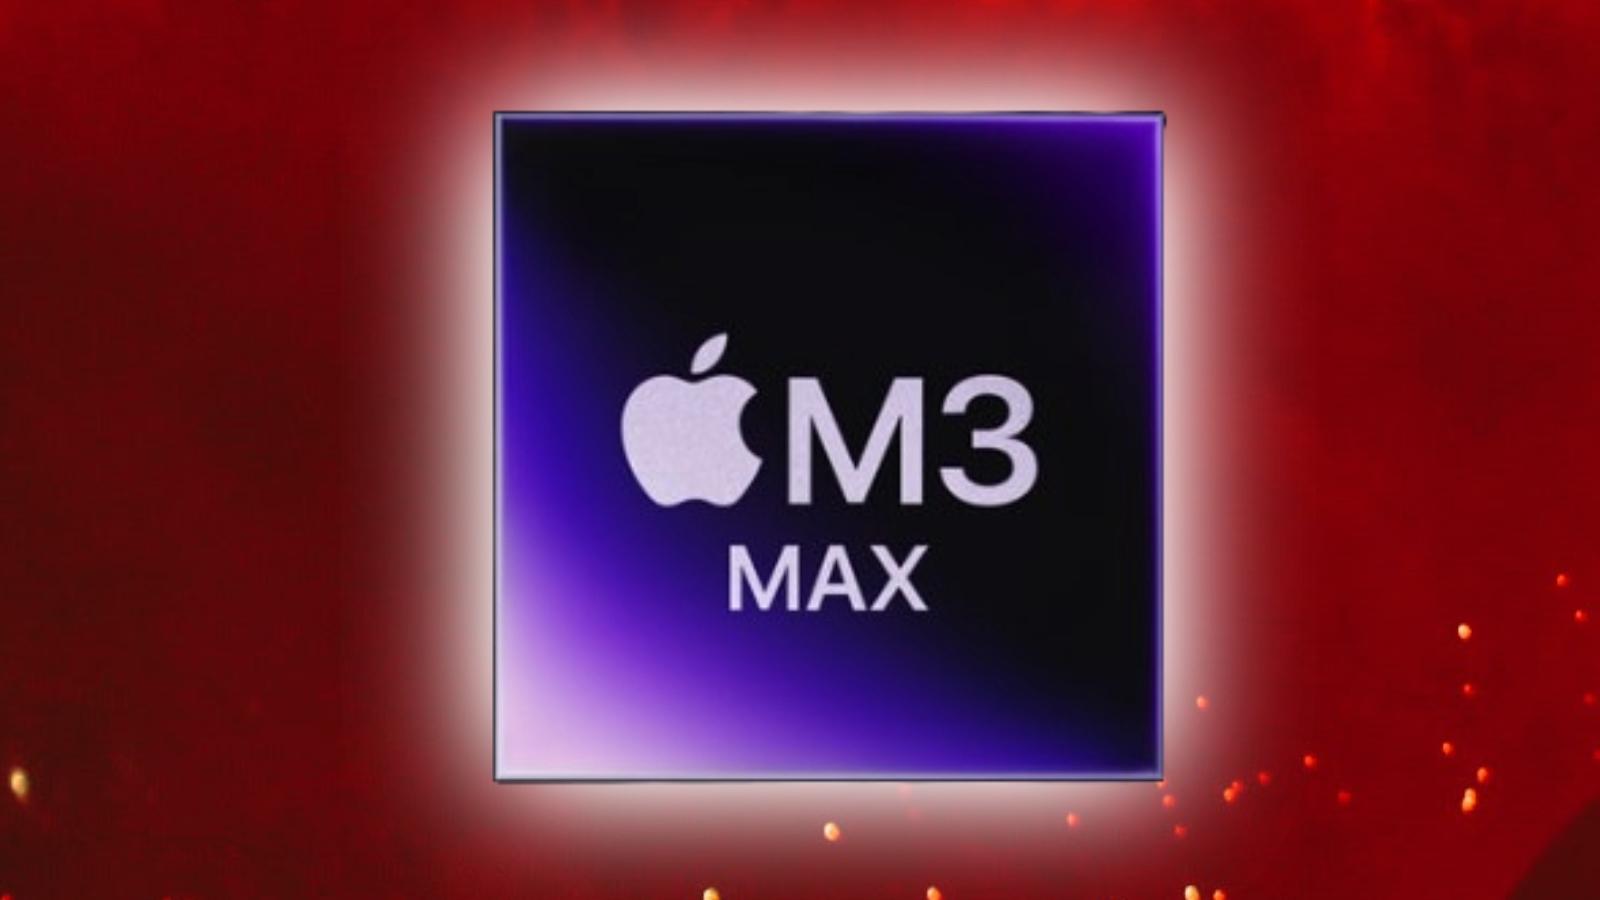 Apple M3 Max with outer glow and red background